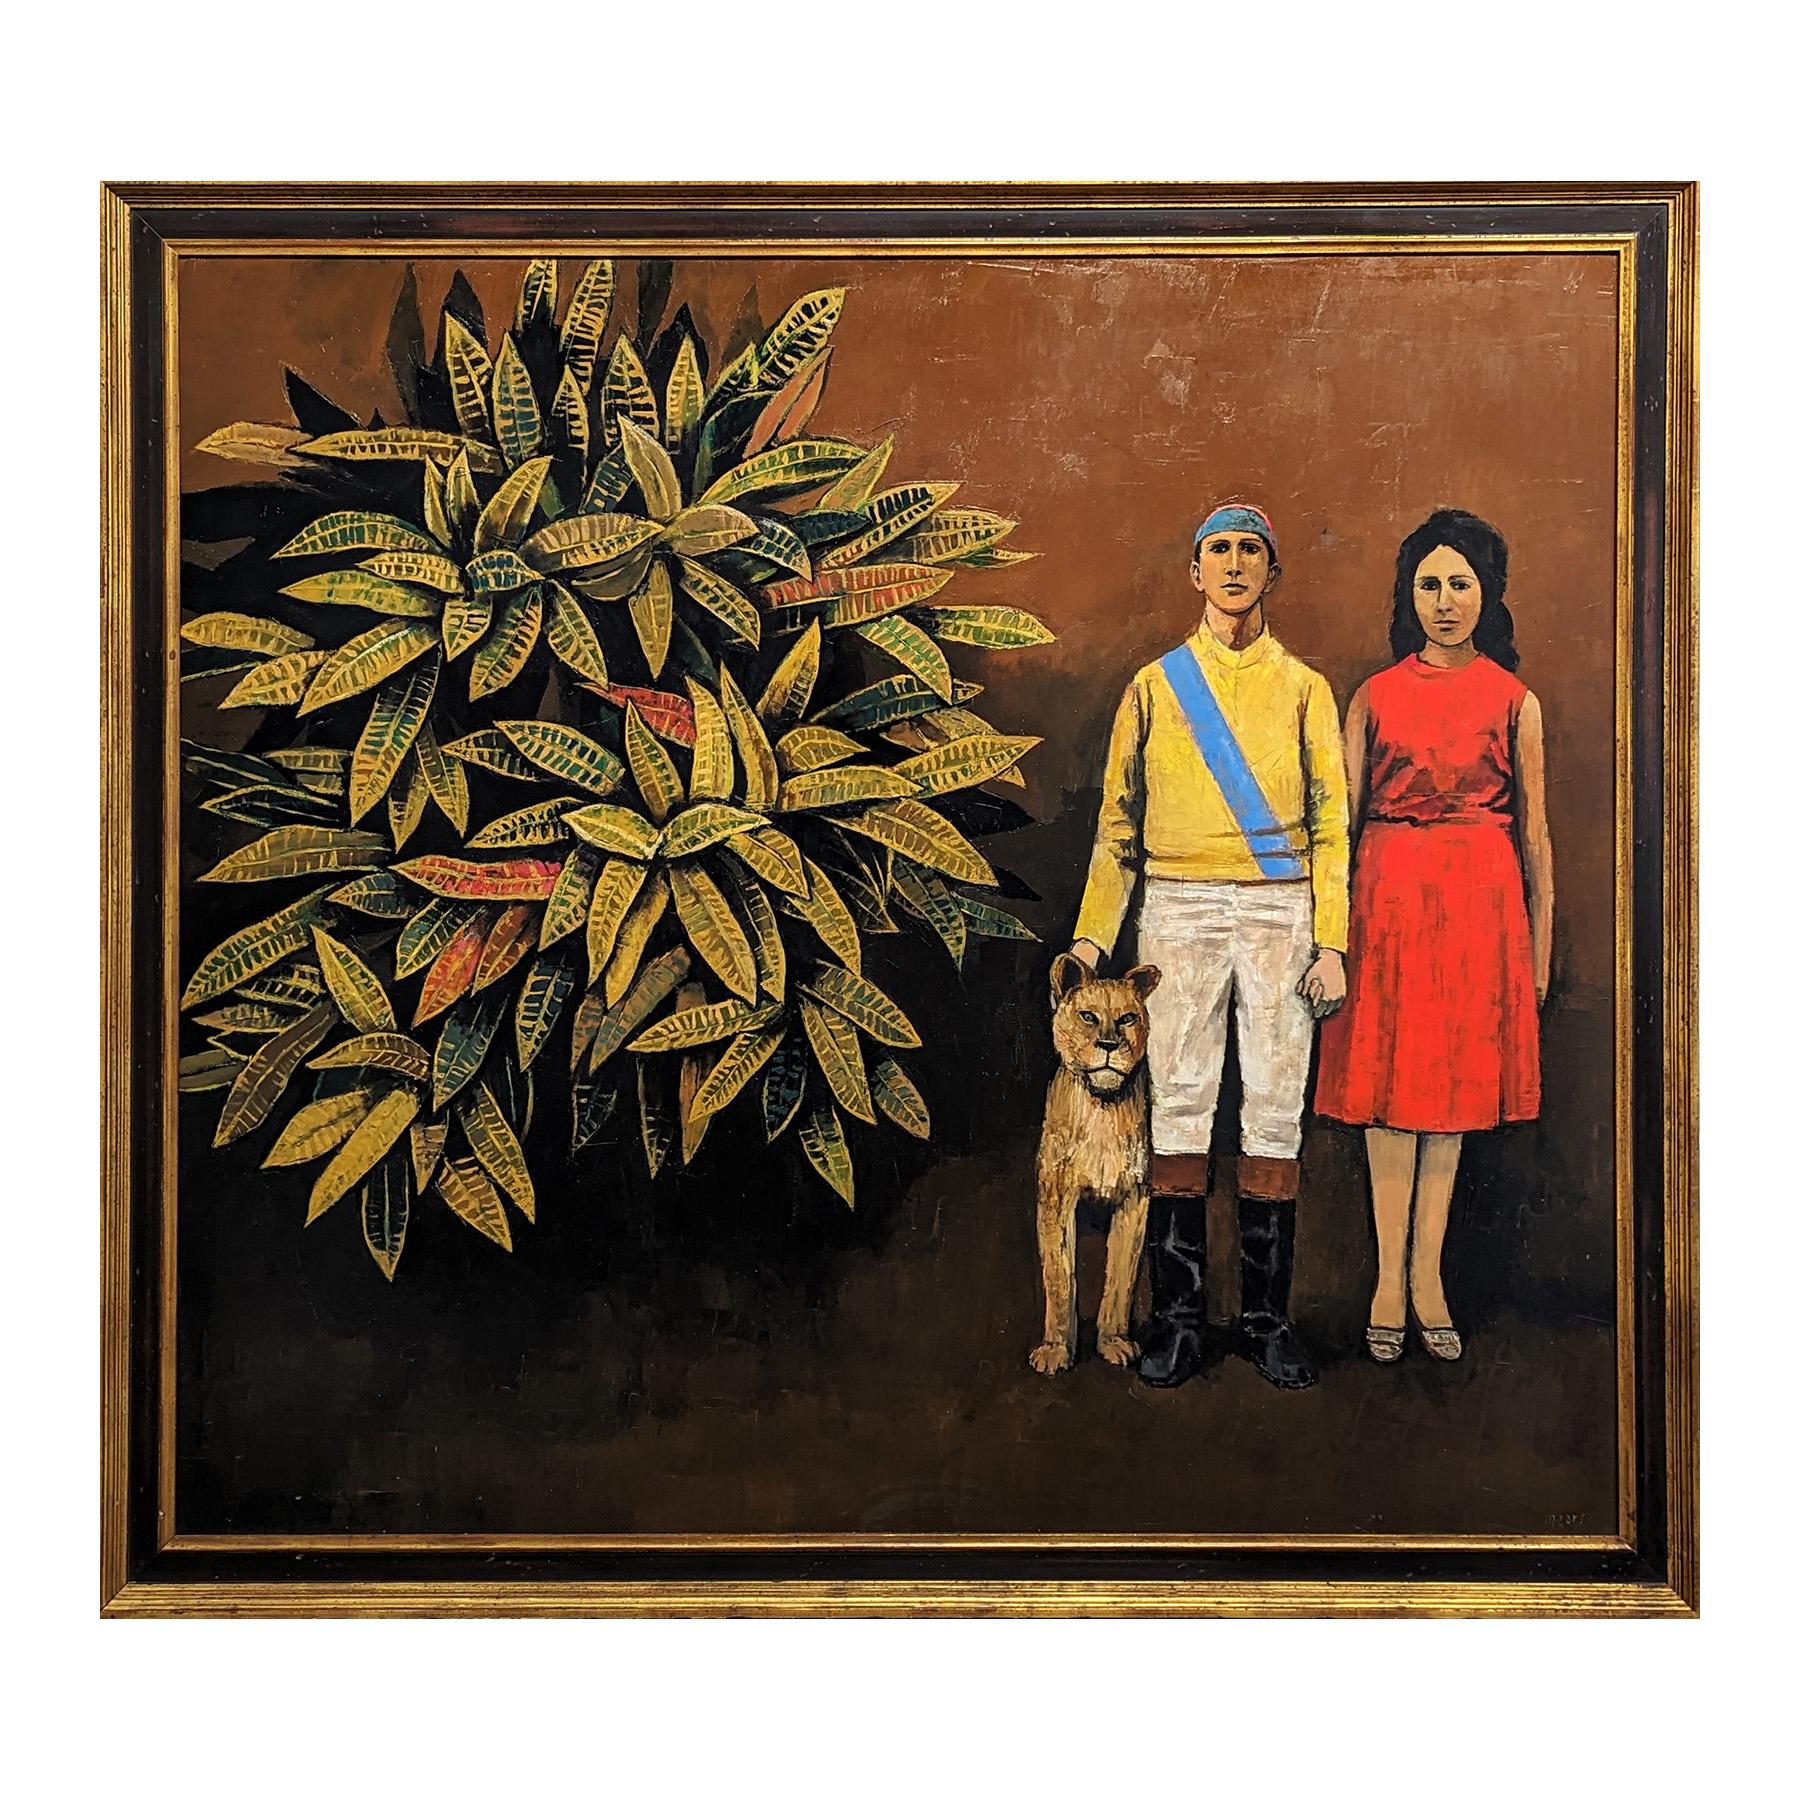 Modern naturalistic portrait painting by well-known Houston-based artist Herb Mears. The work  features a detailed rendering of a jockey wearing a yellow and blue outfit standing next to his wife and a young lion. Signed by the artist in the front